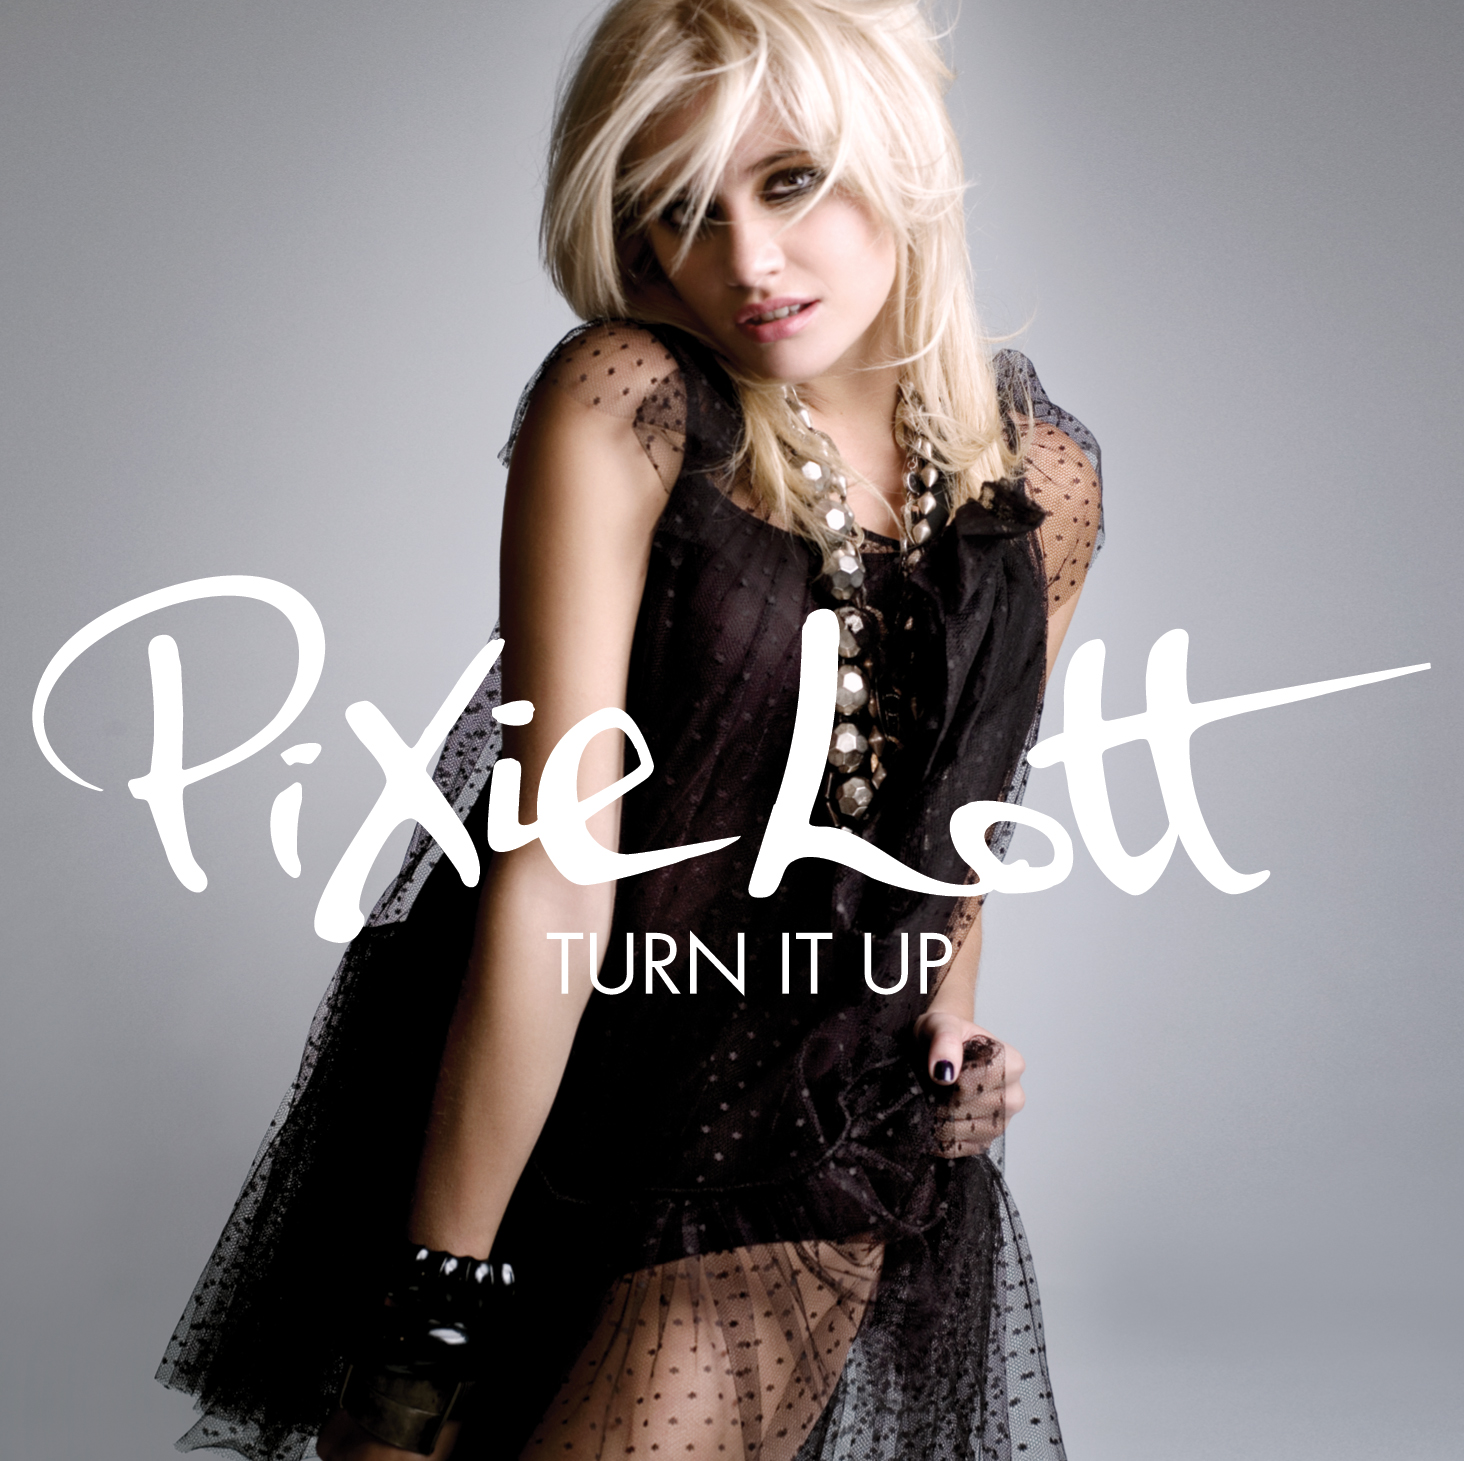 Pixie Lott Photo, Wallpaper and Picture